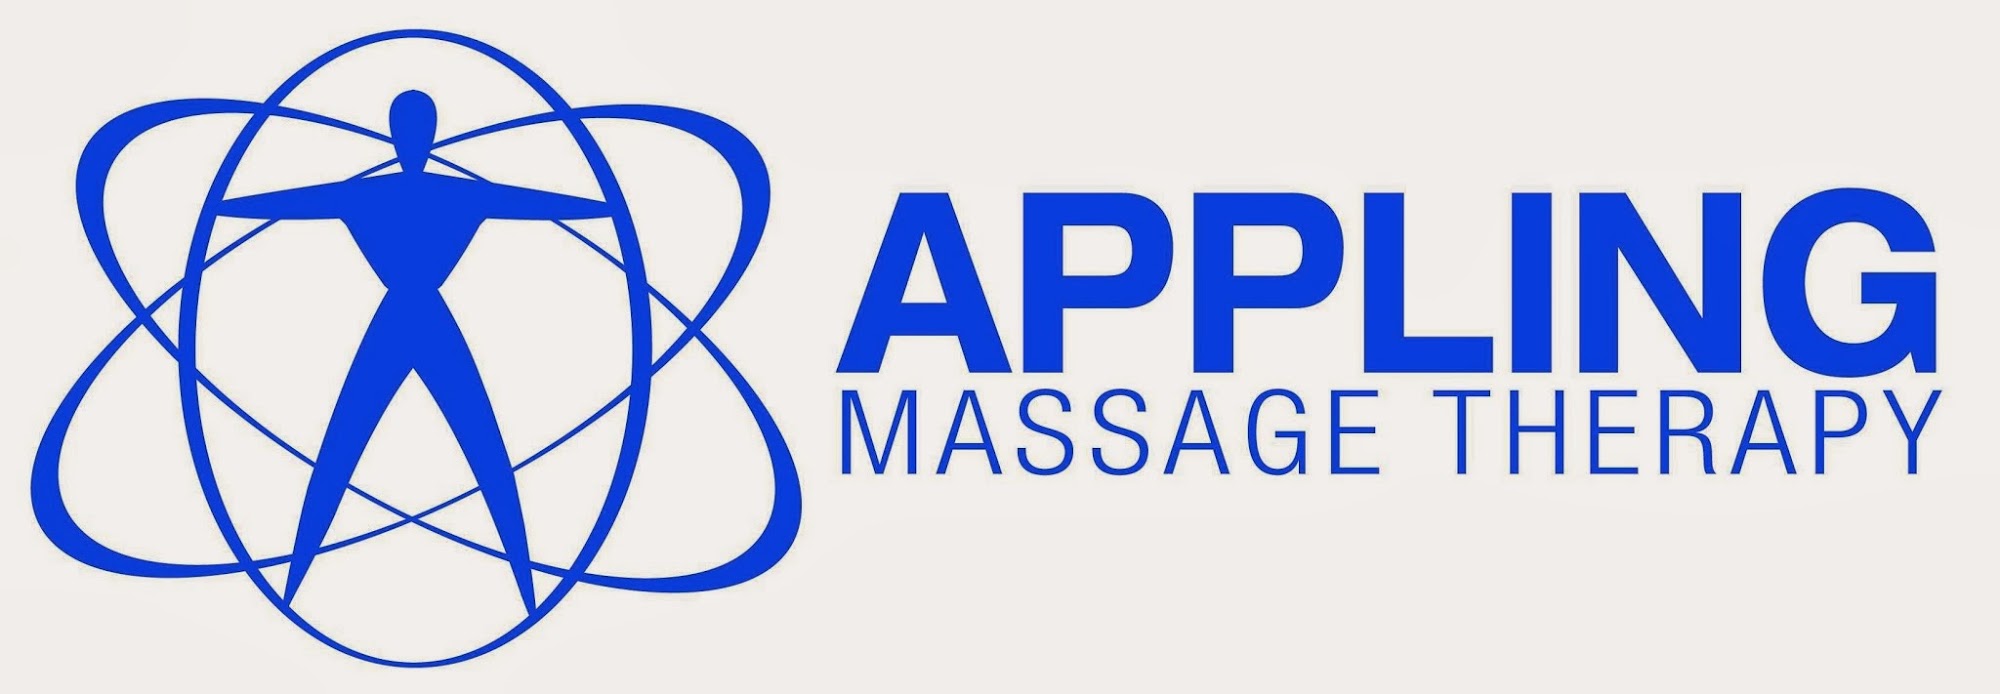 Appling Massage Therapy